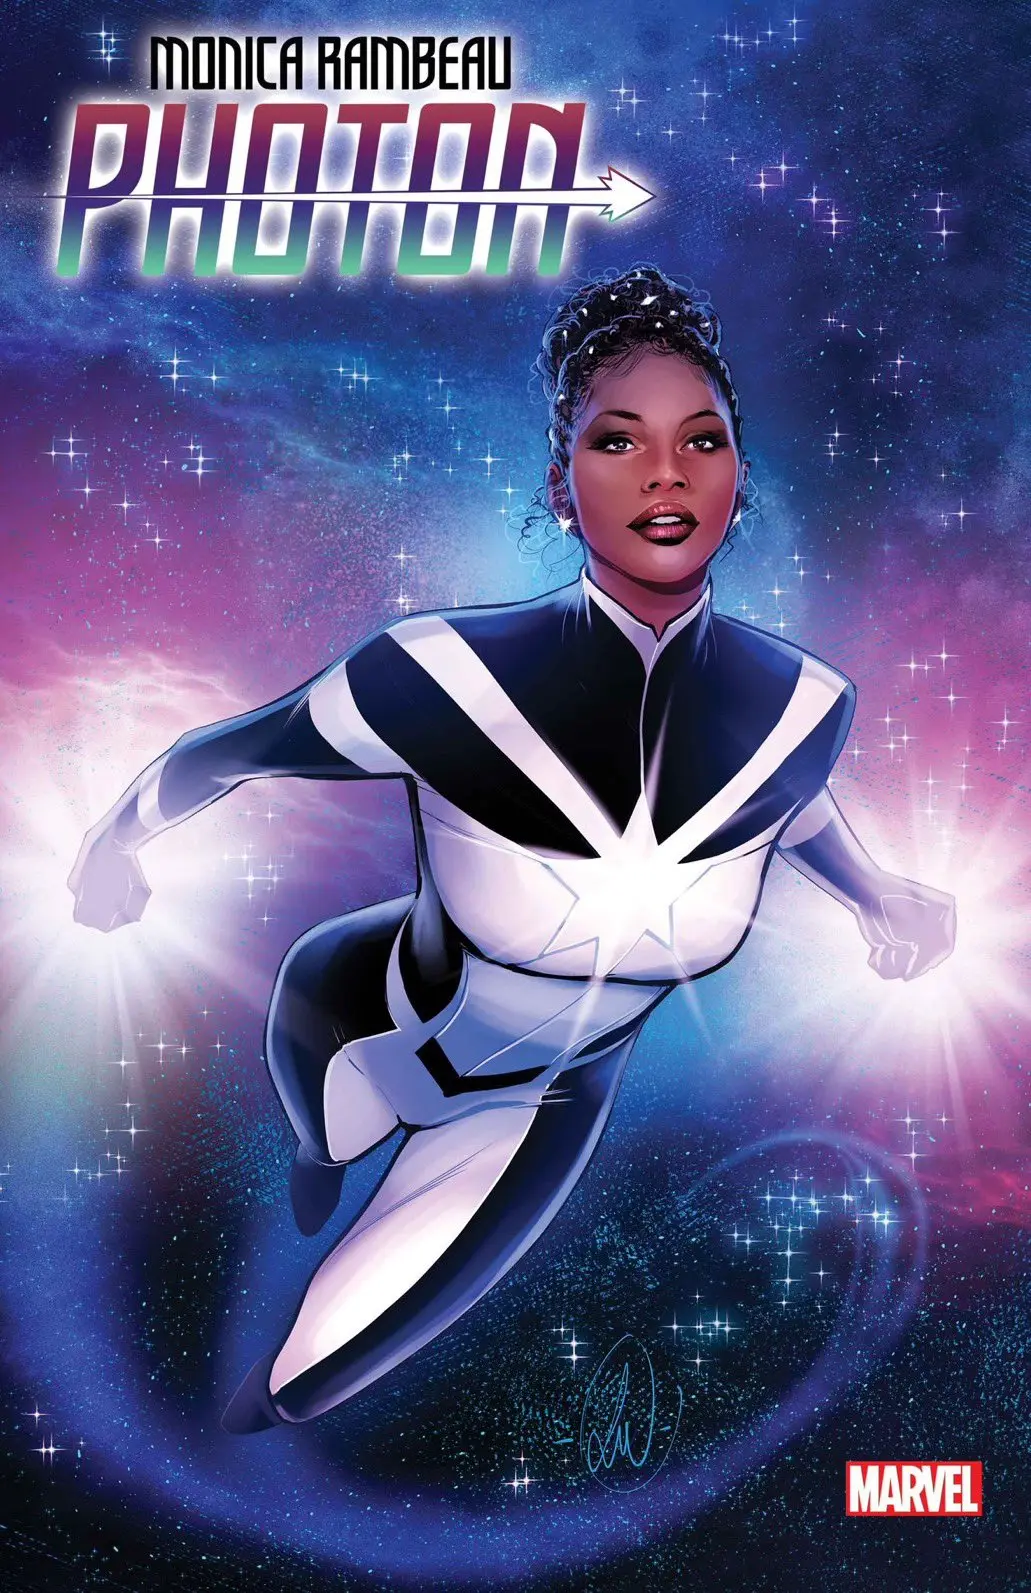 Monica Rambeau is supposed to be calling Photon in Captain Marvel 2.